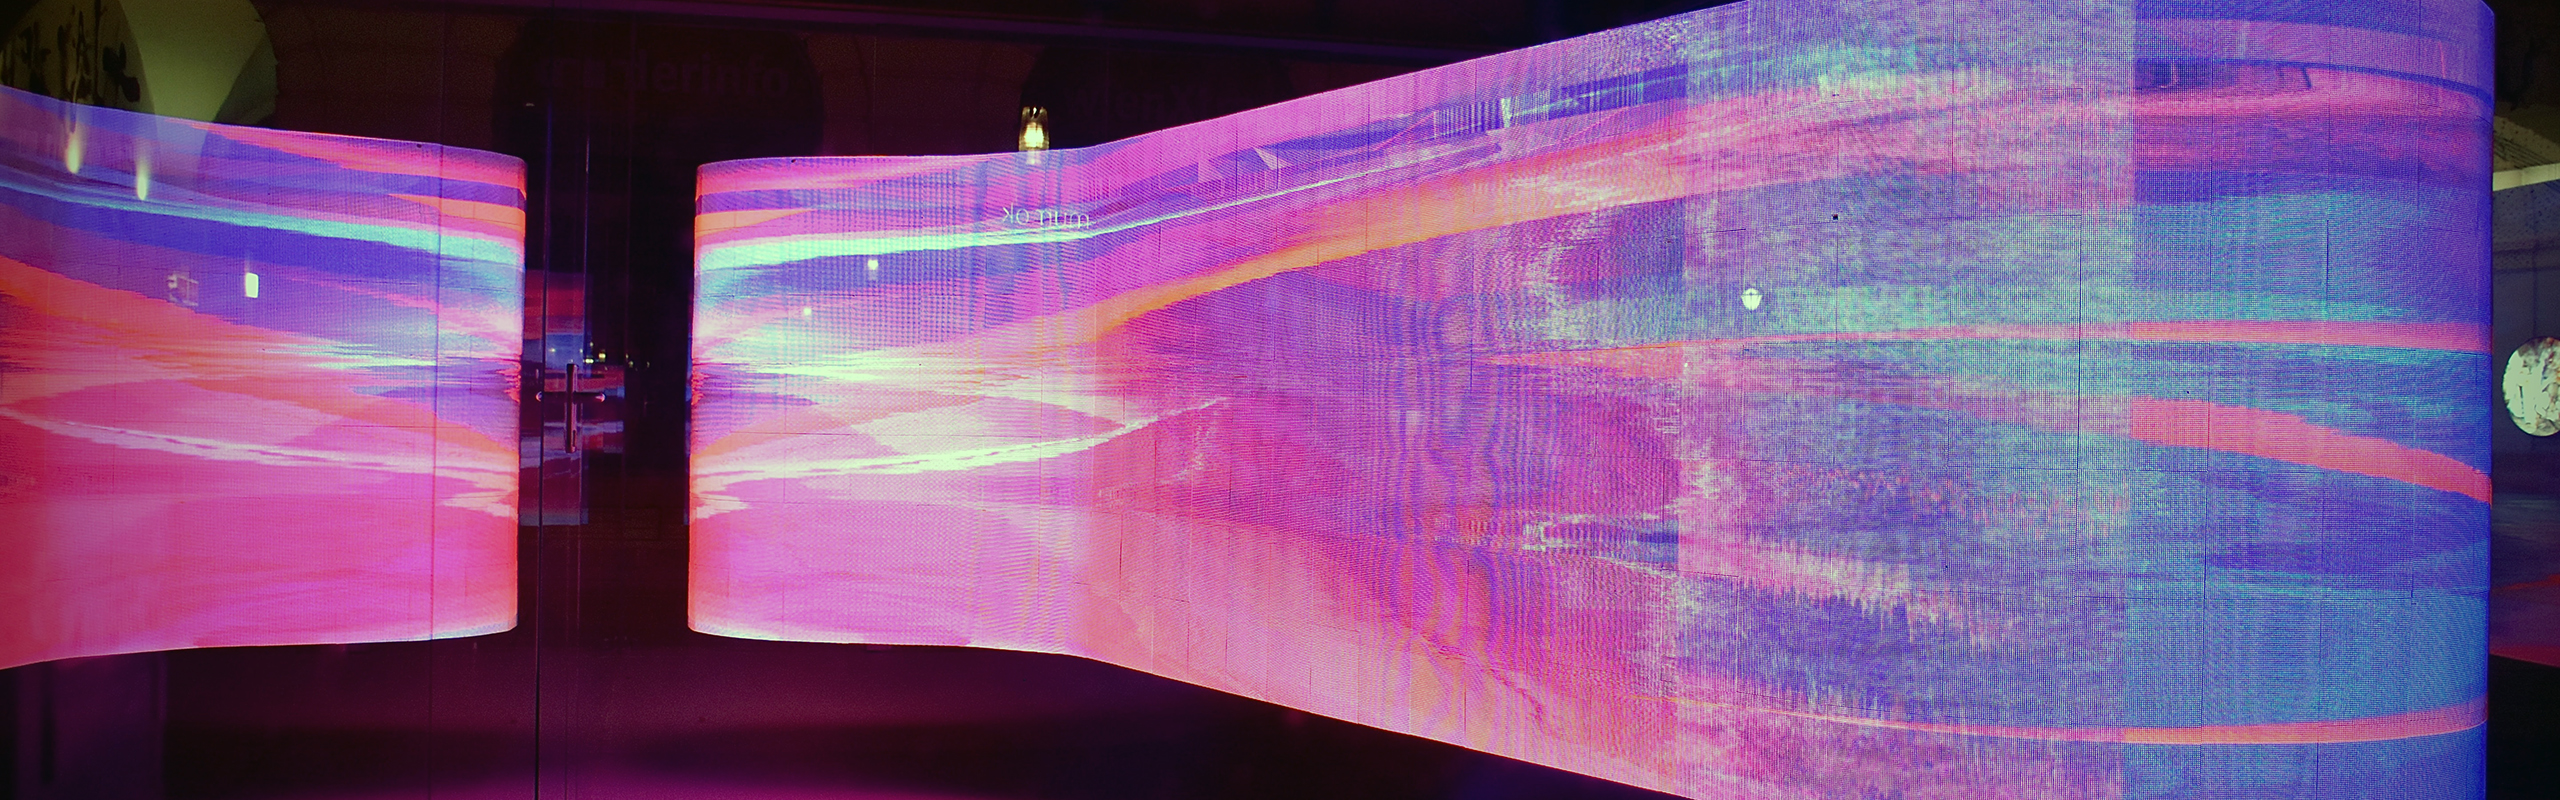 Indoor Projection Mapping